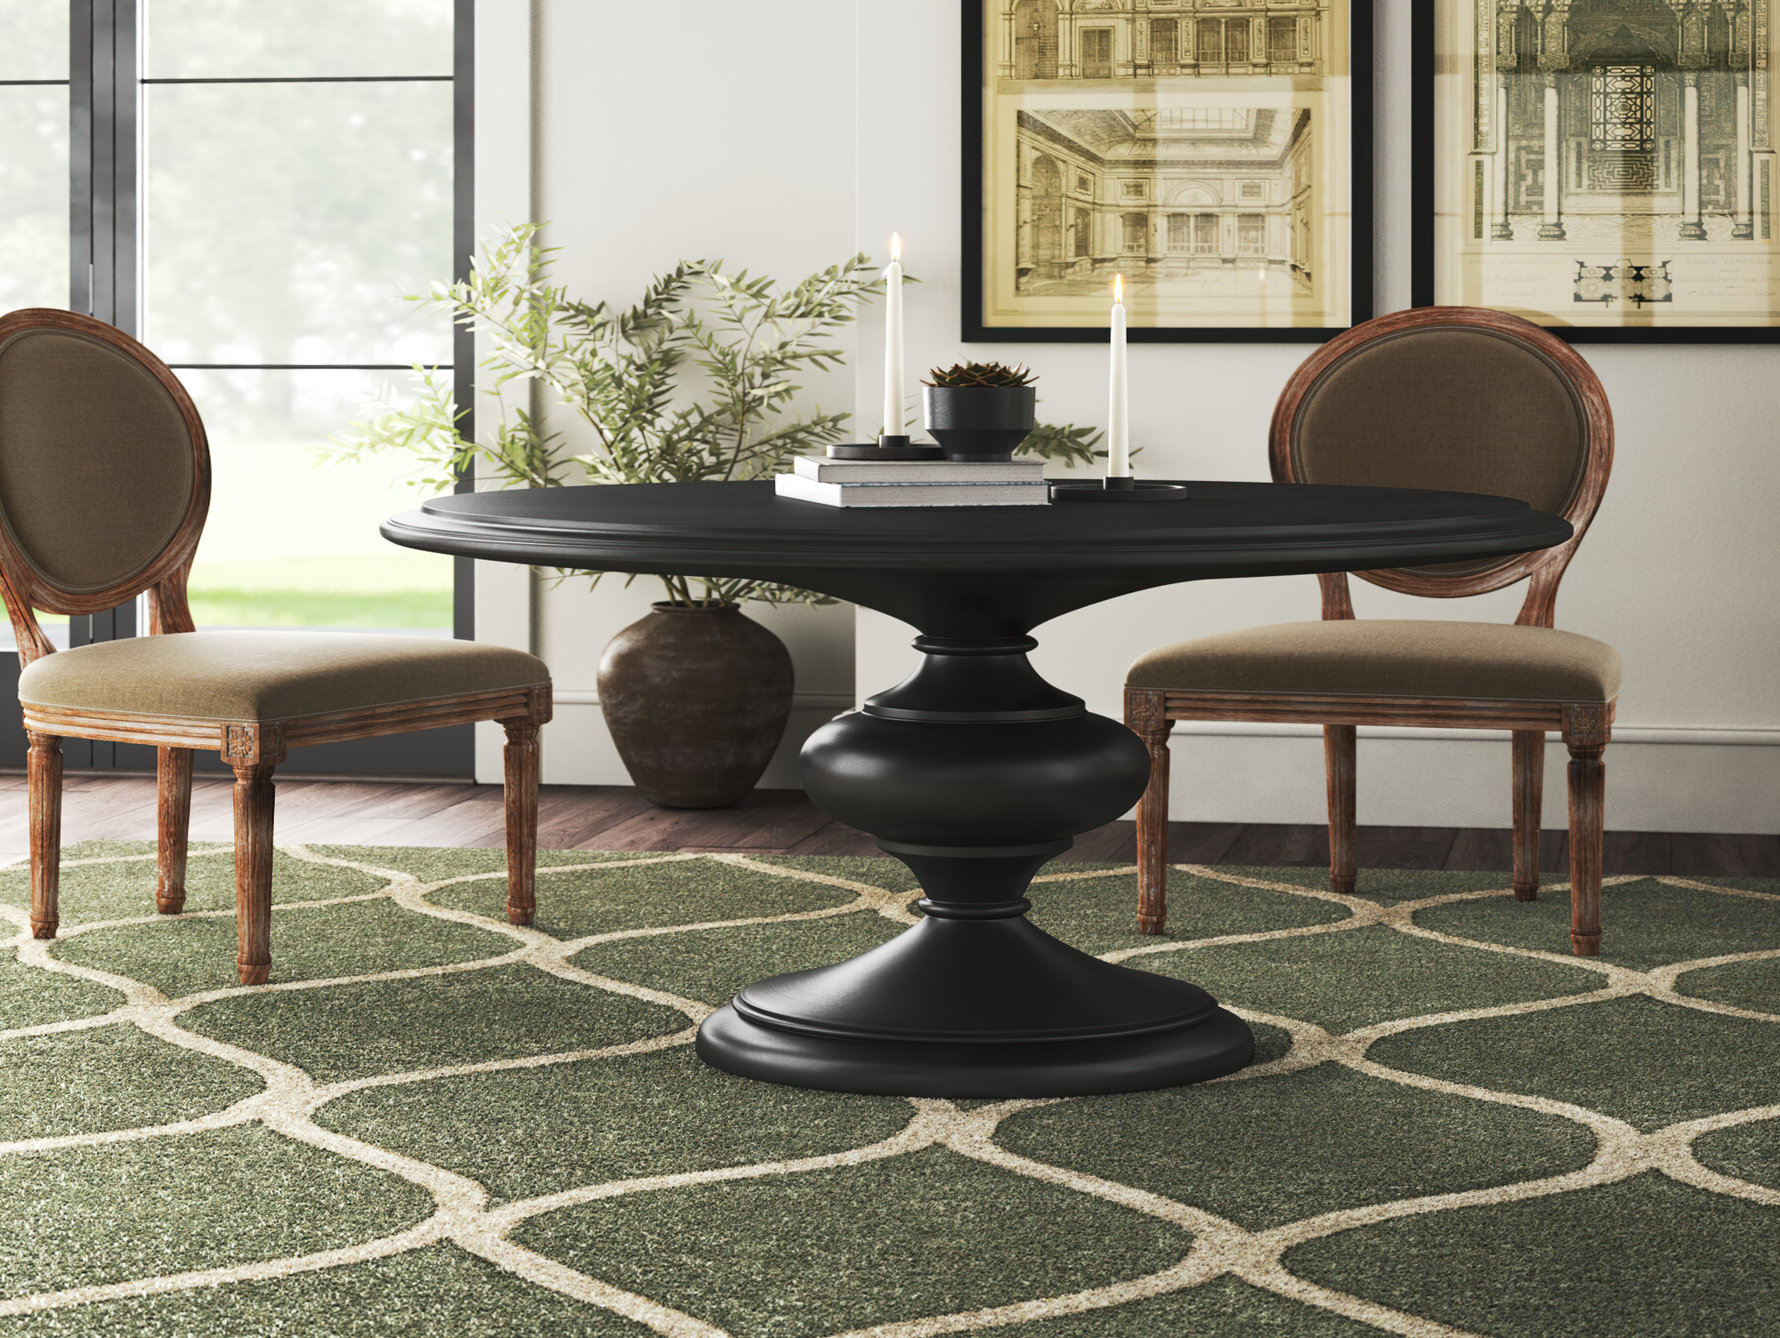 5-7 Seat Round Dining Tables